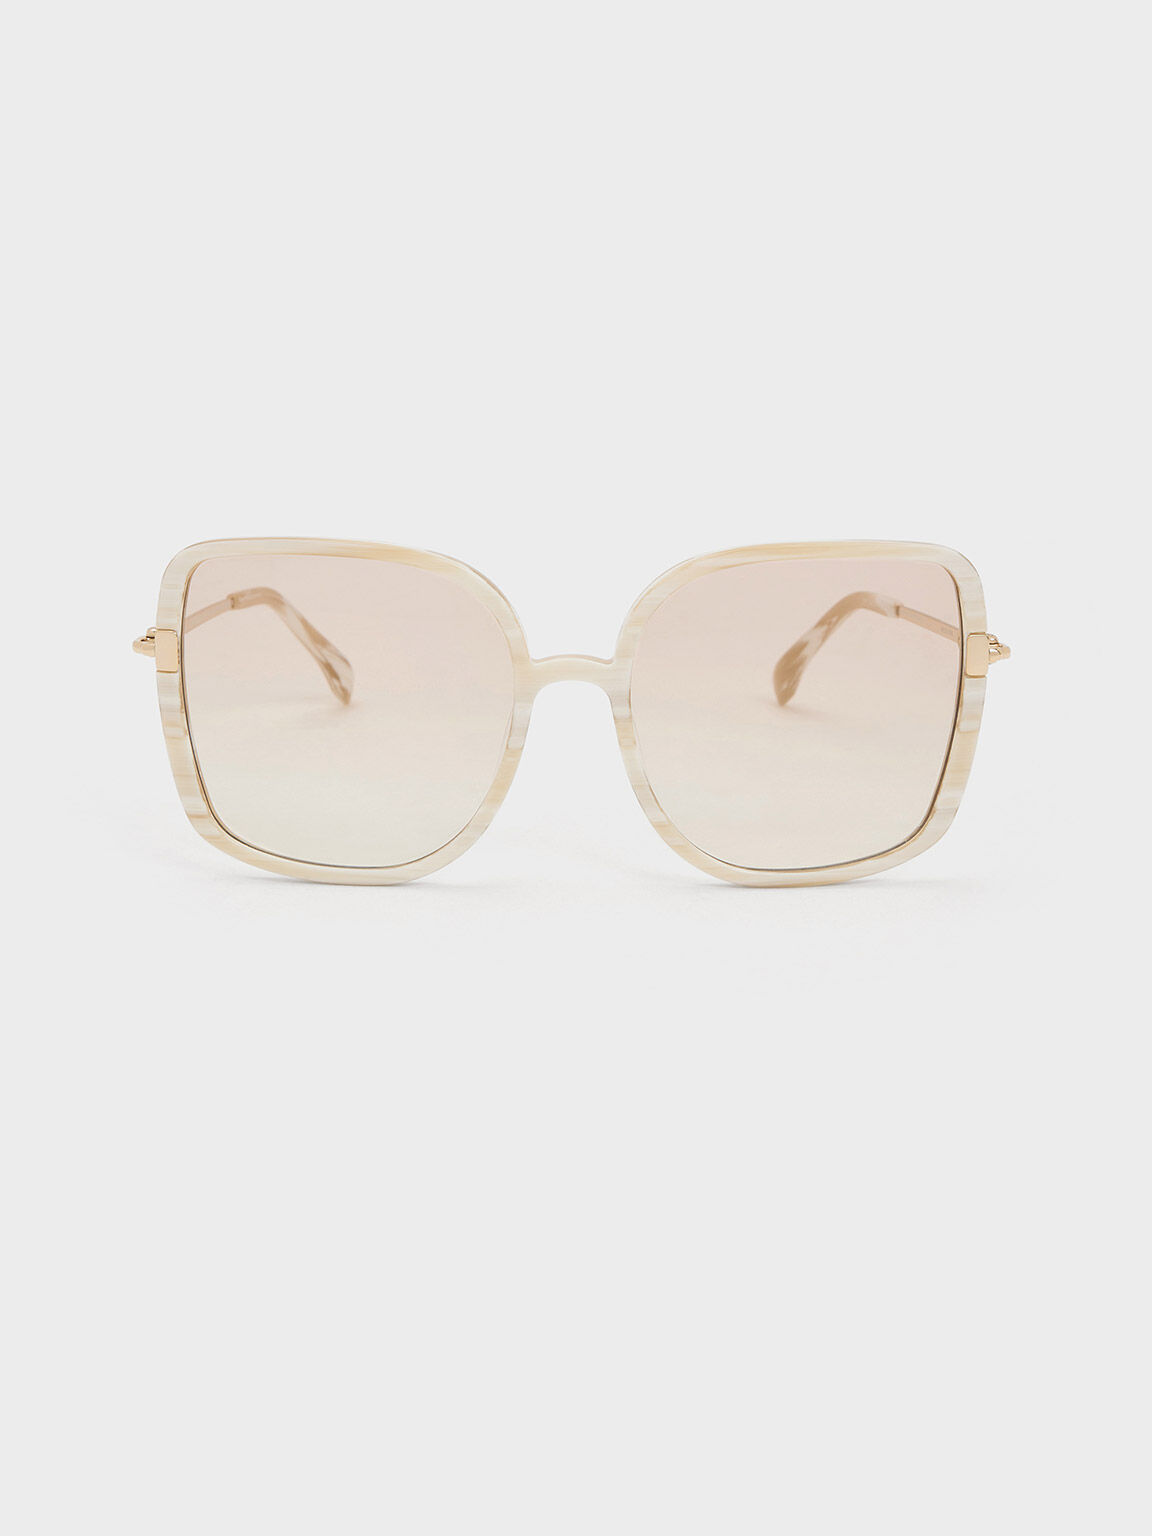 Cream Oversized Square Chain-Link Sunglasses - CHARLES & KEITH TH